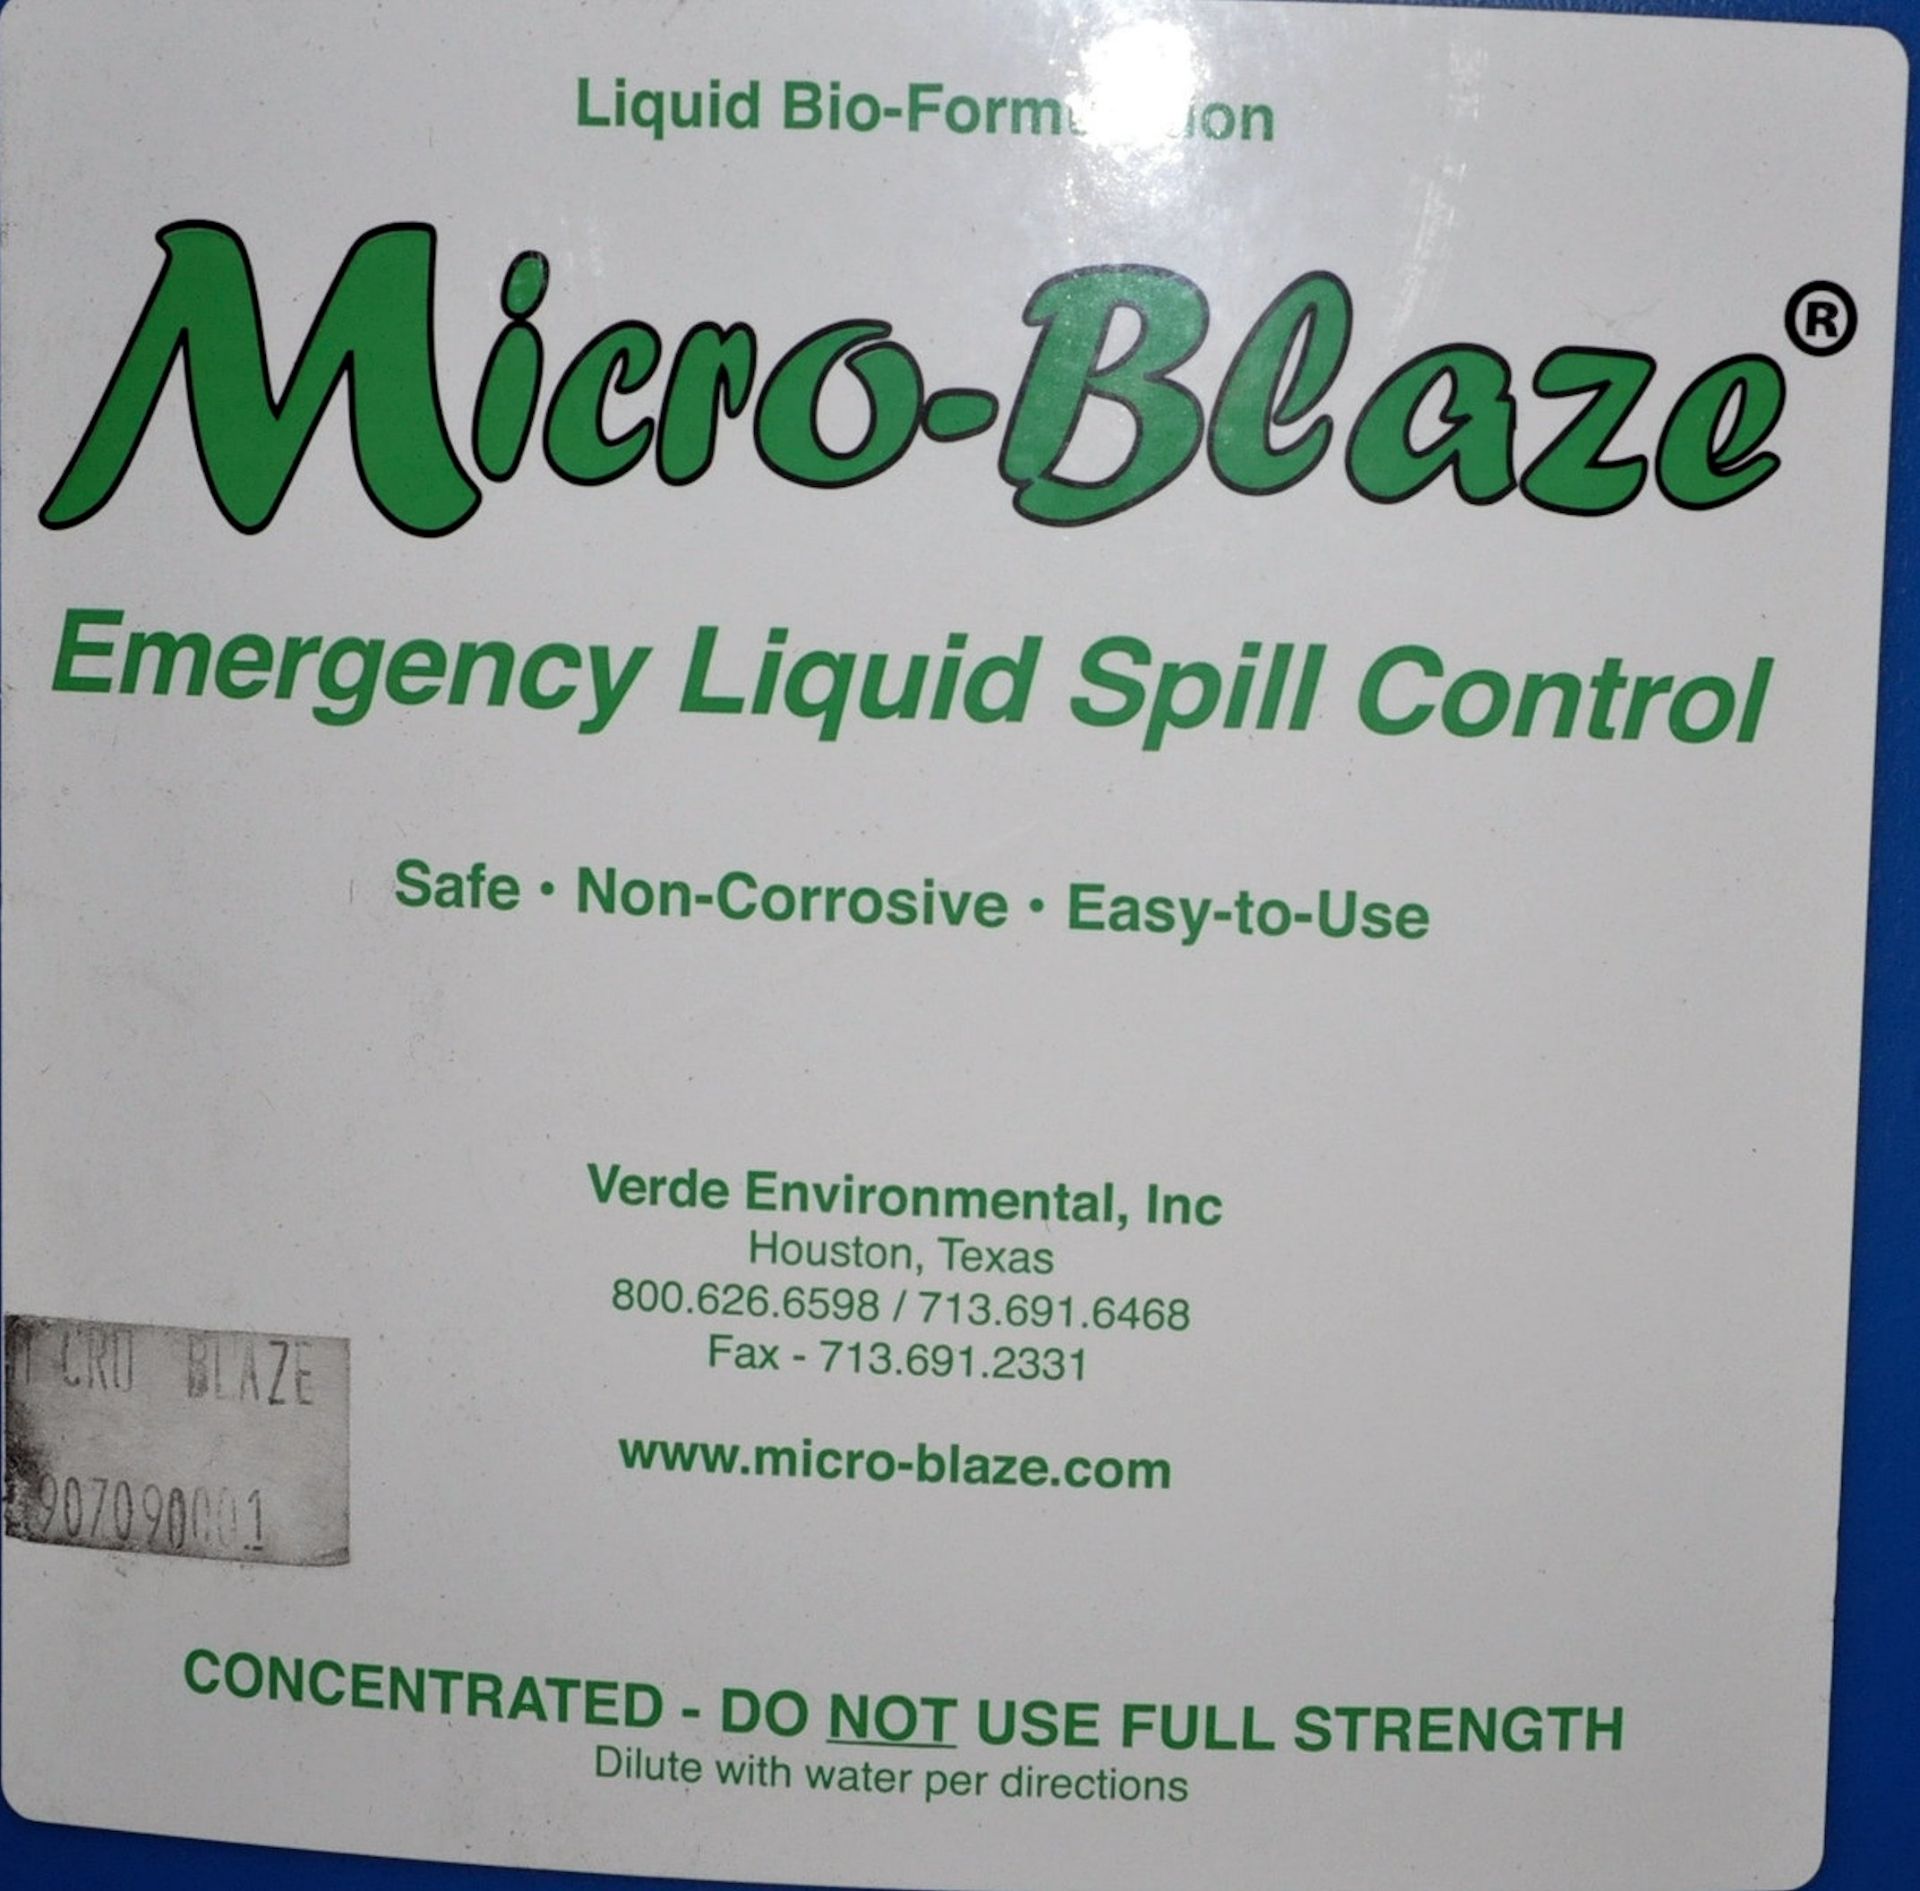 55-Gallon Drum of Micro Beaze Emergency Liquid Spill Control on (1) Pallet, (Oils Storage Building), - Image 2 of 2